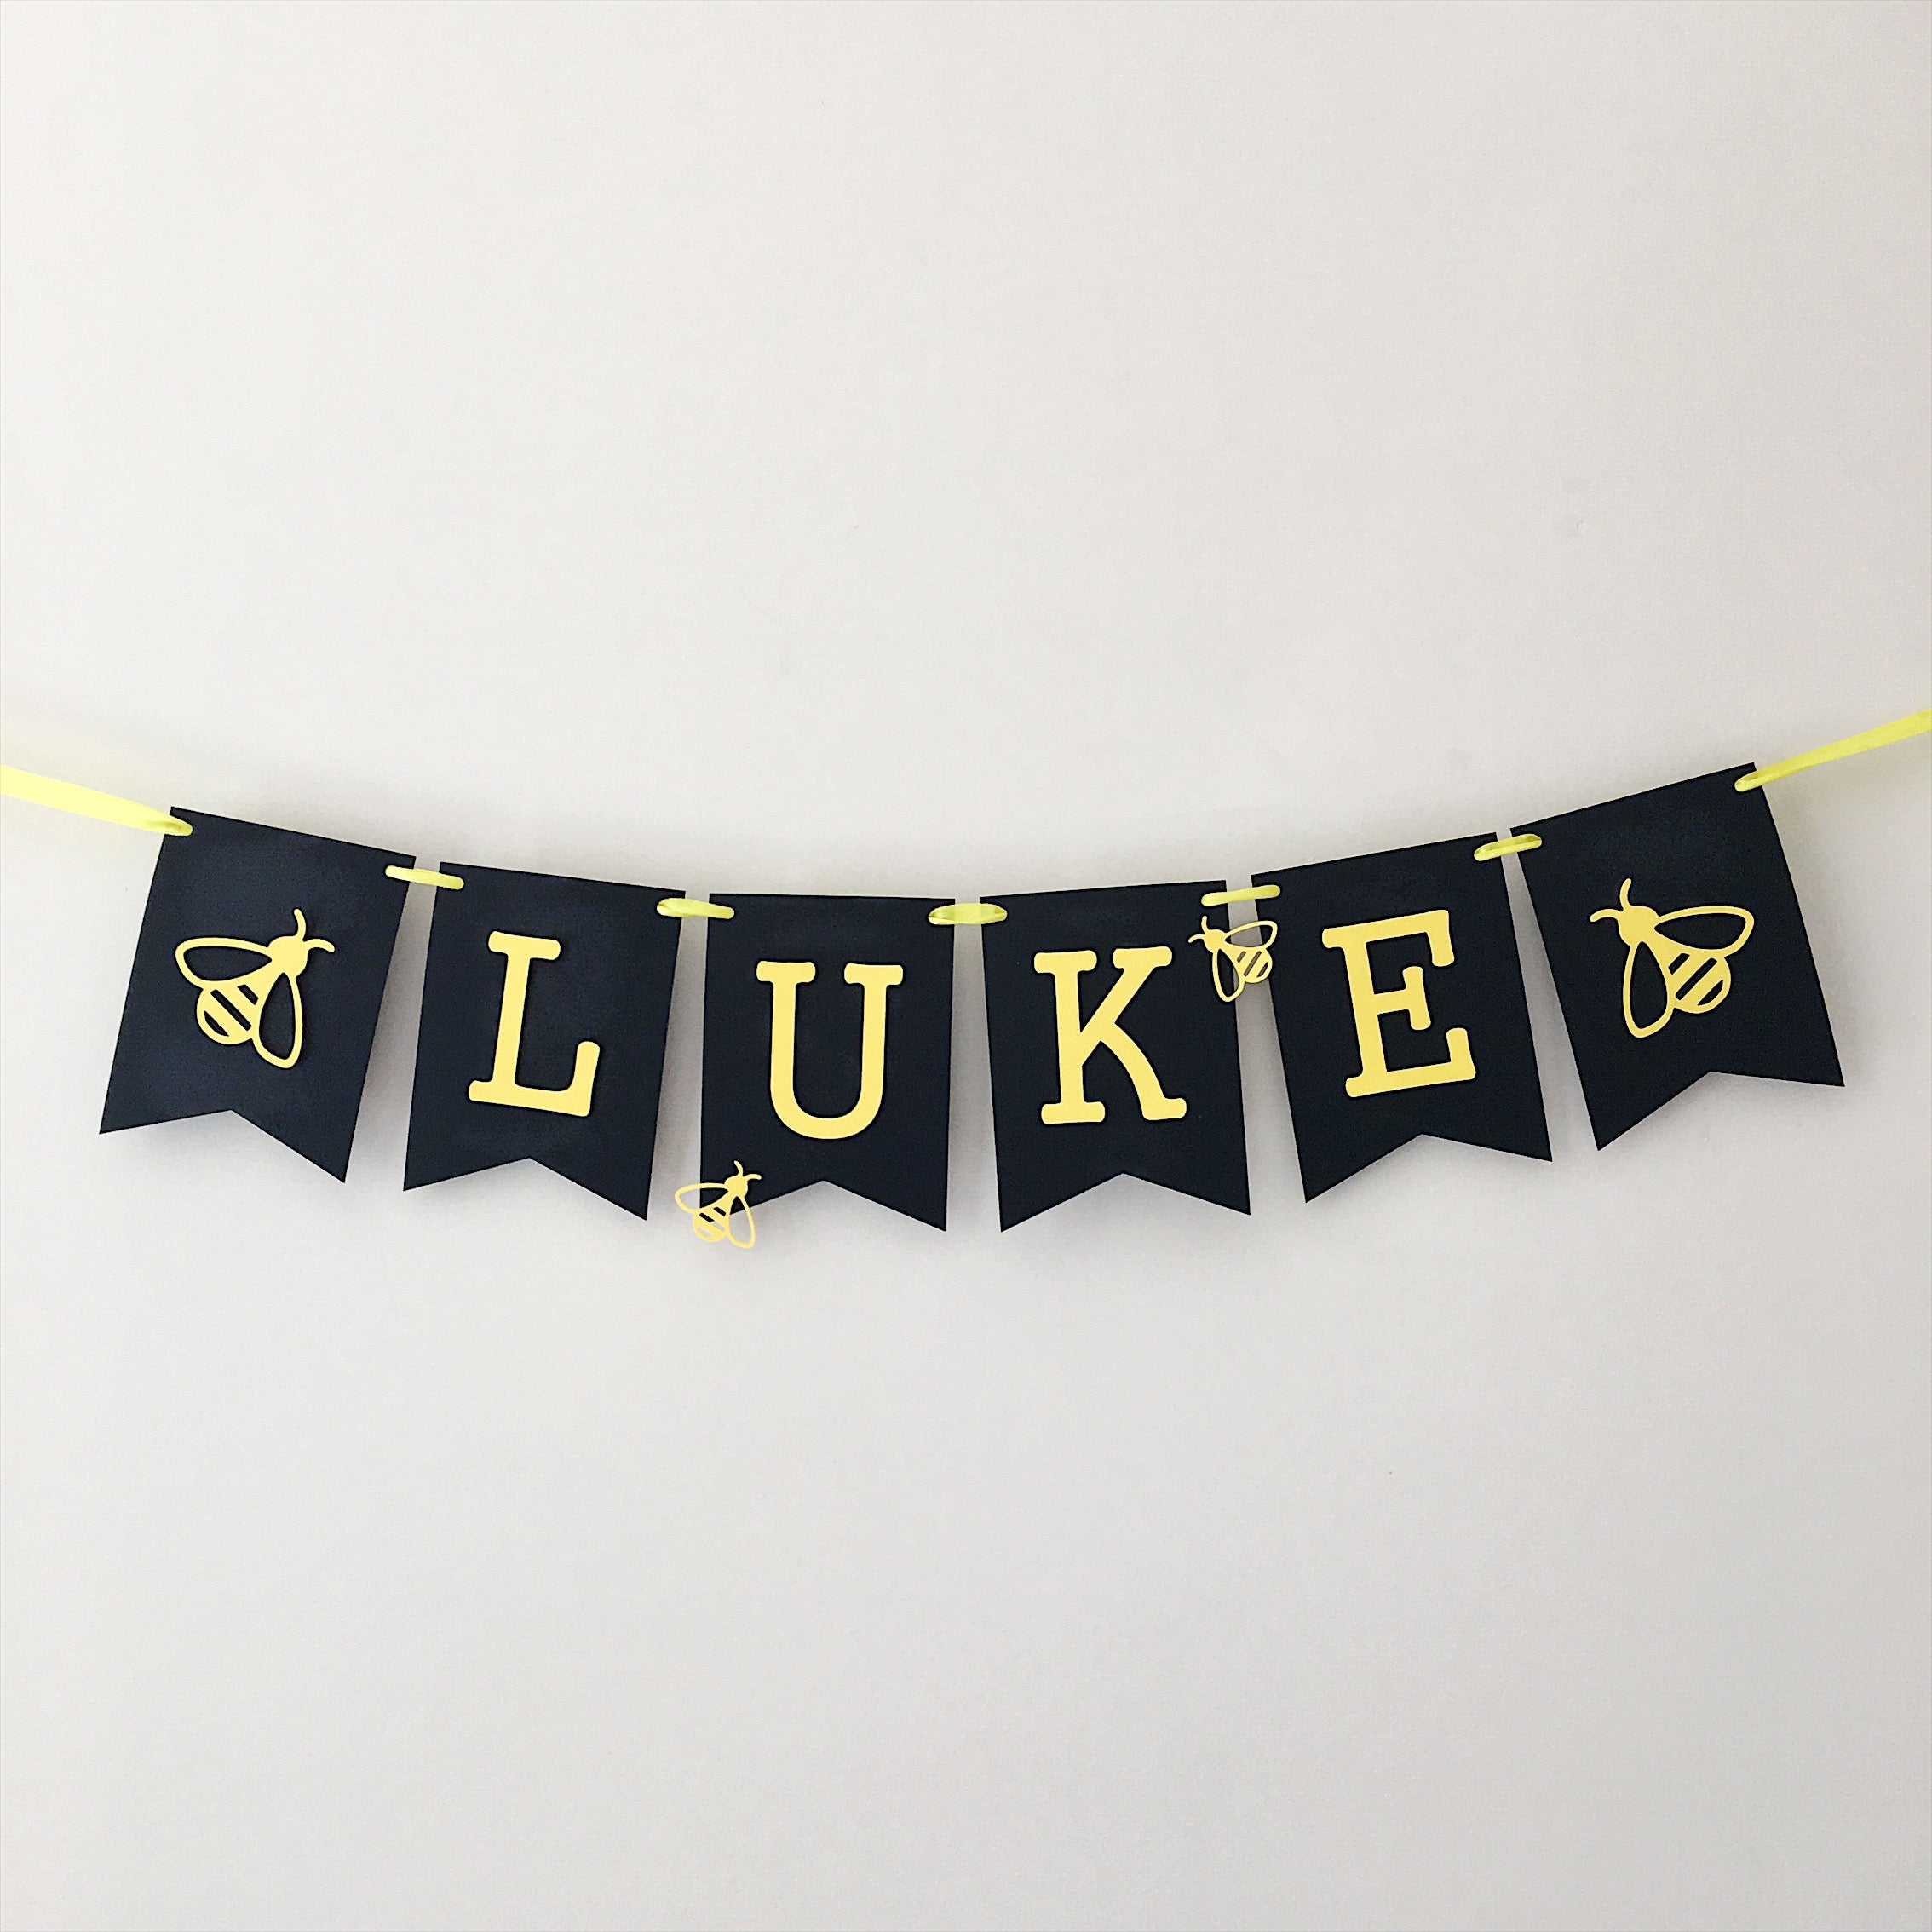 Personalized Name Banner 1 st Birthday Banner Bumble Bee Birthday Party Decoration Baby Shower Photo Shoot Prop Custom Baby Banner Bumble Bee Banner 